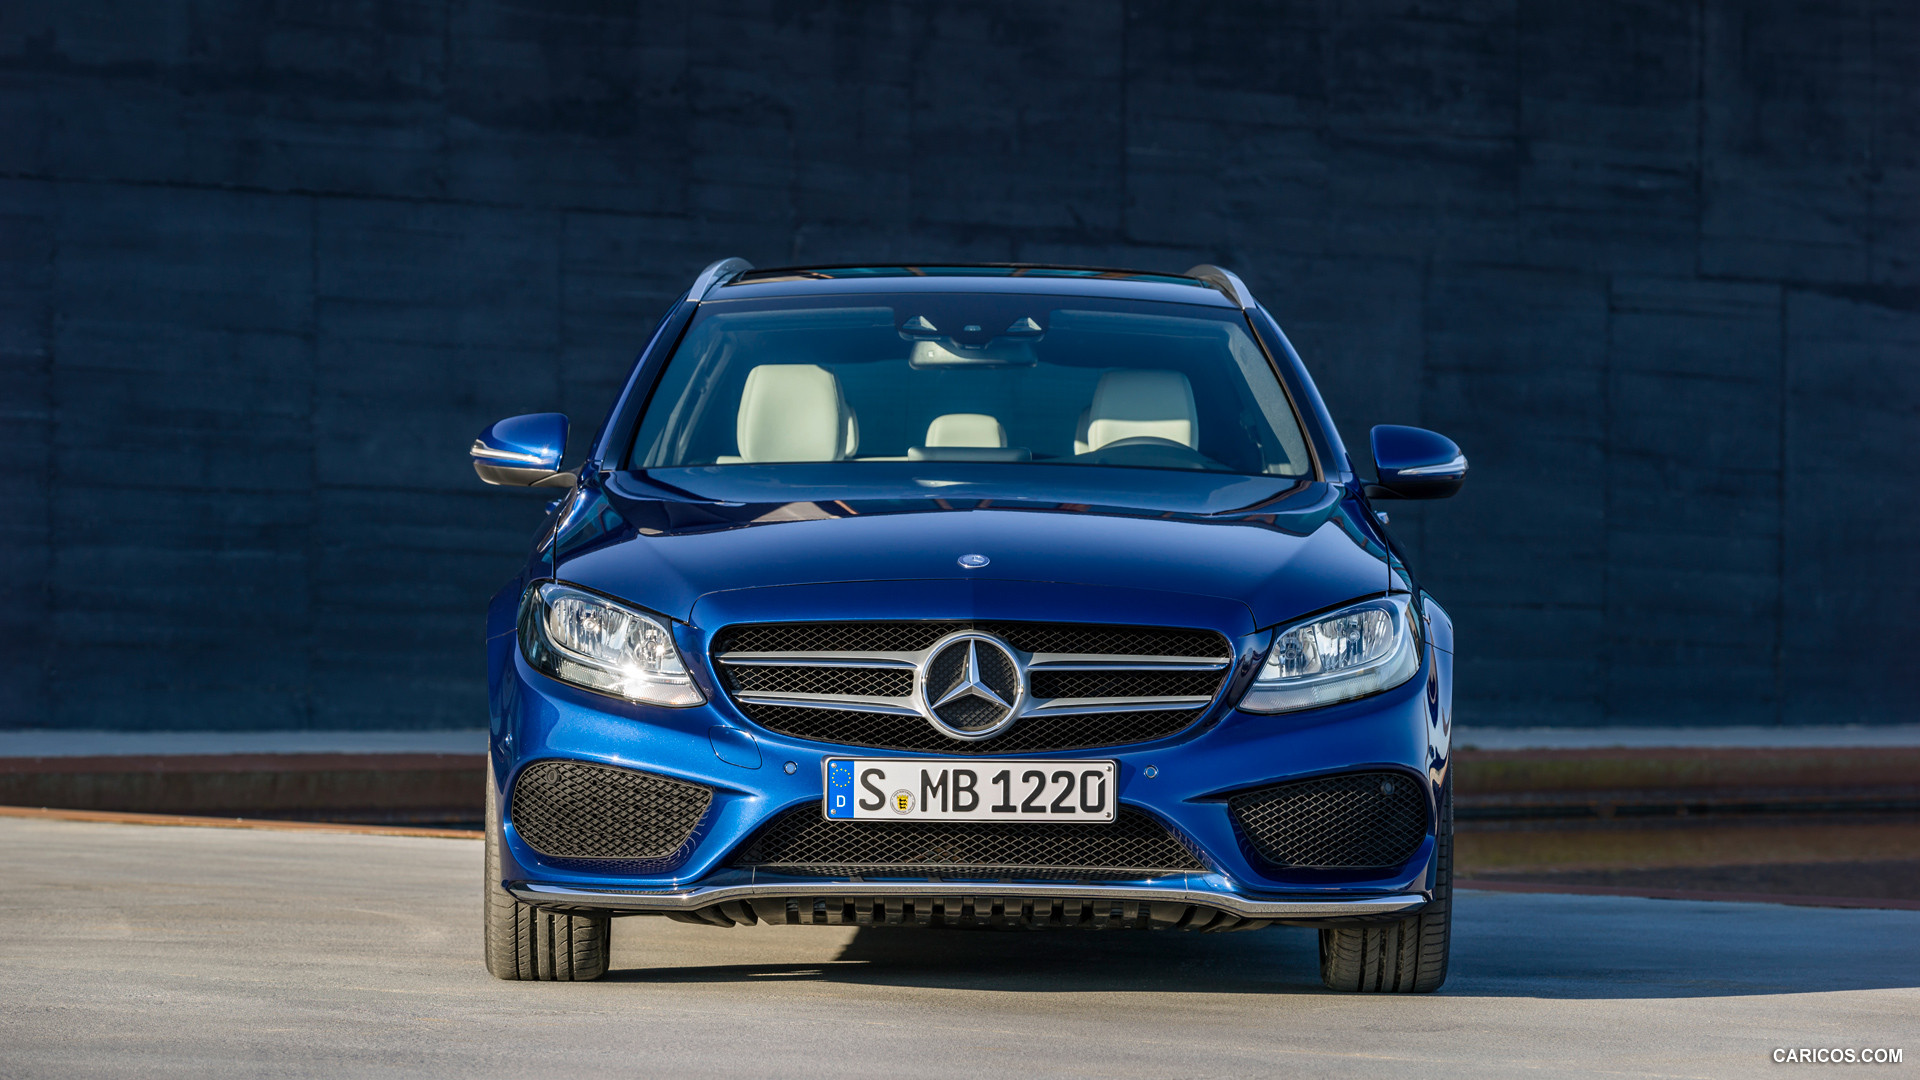 2015 Mercedes-Benz C-Class Estate C250 BlueTEC 4MATIC (AMG sports package) - Front, #49 of 173